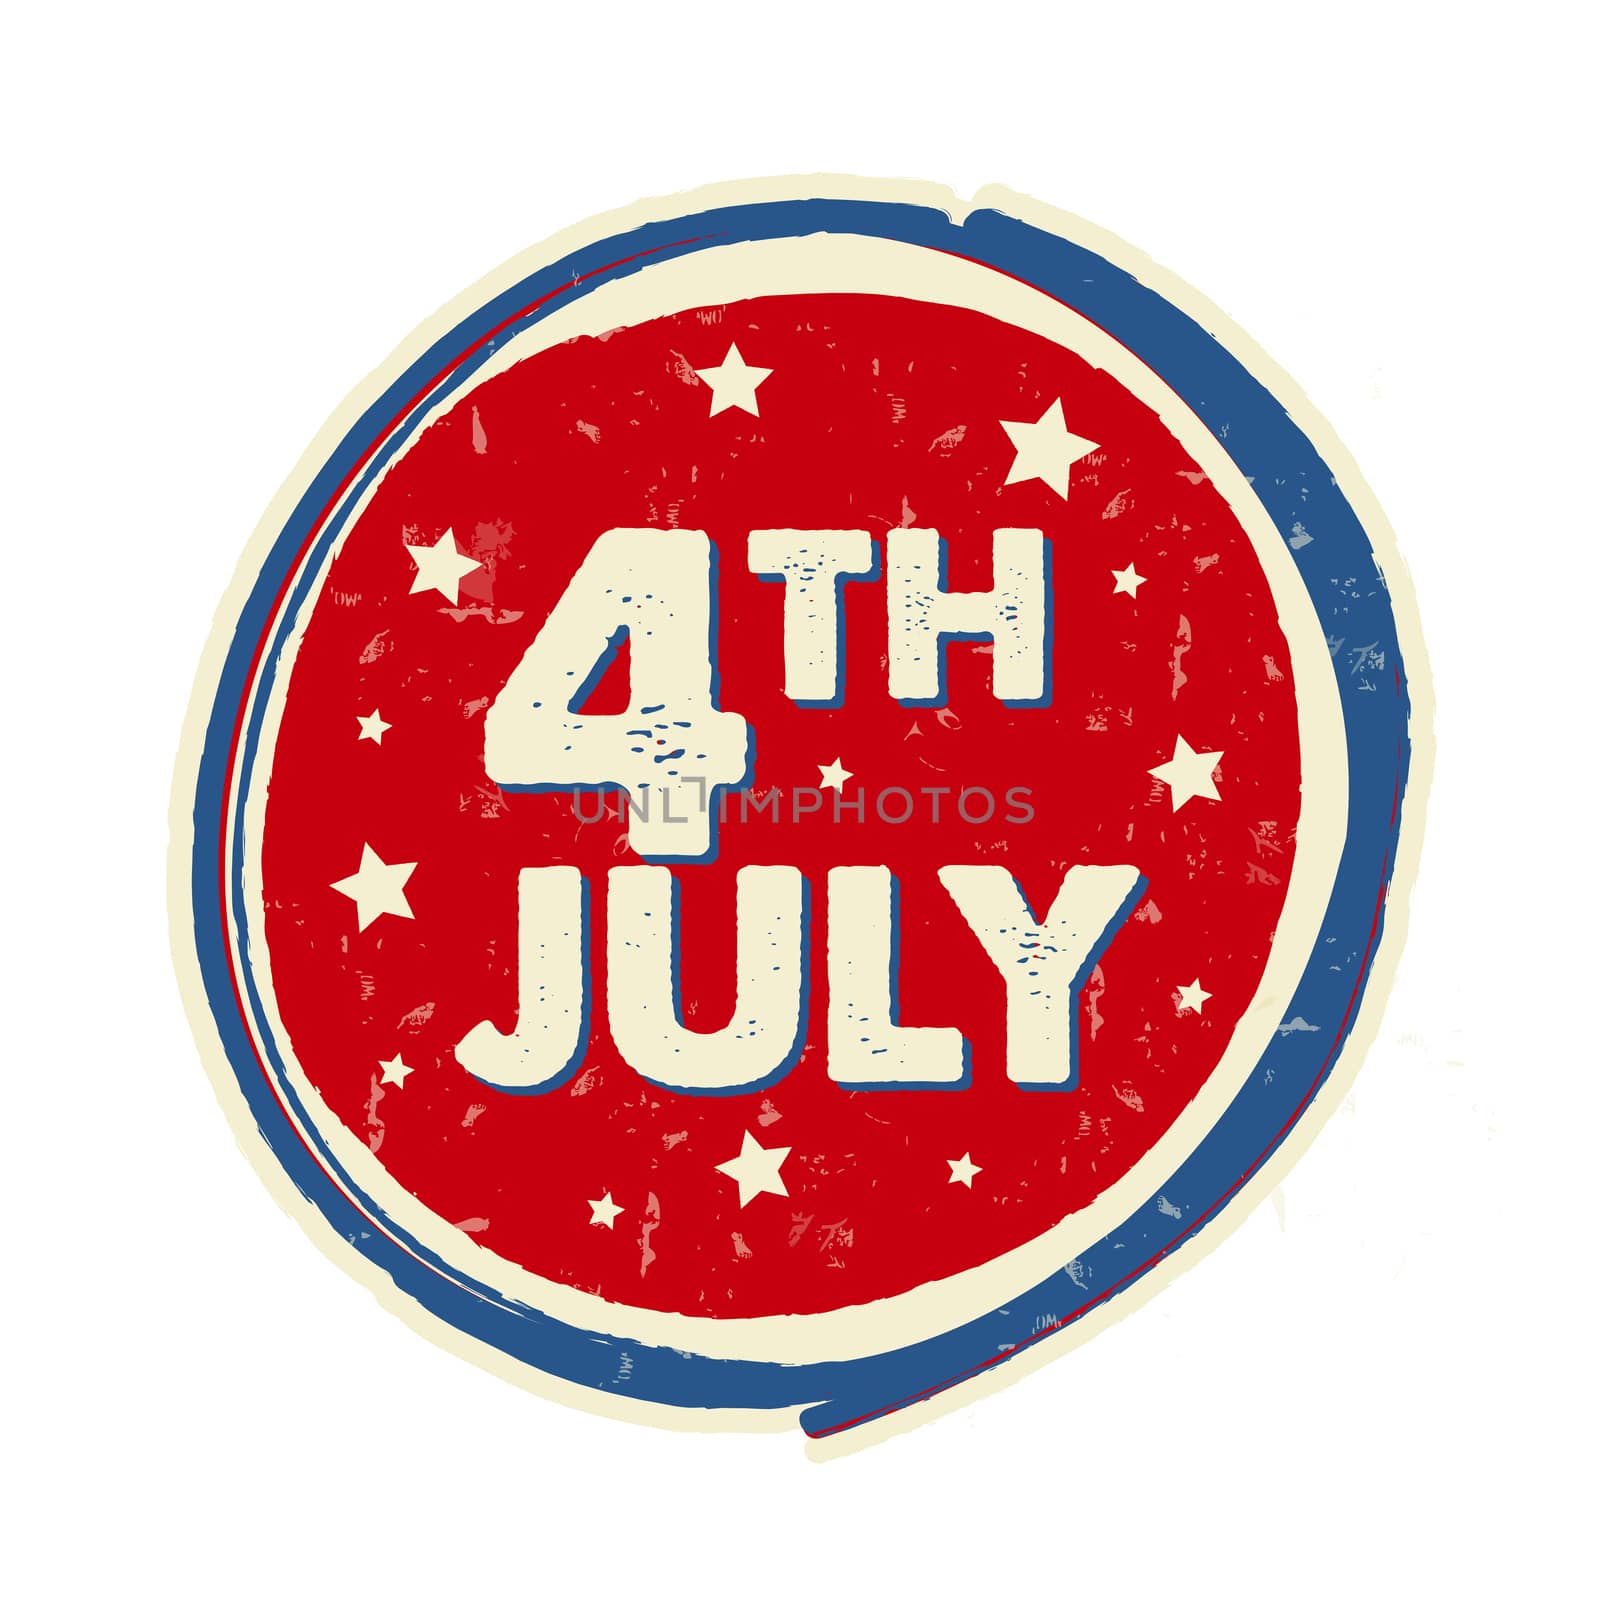 4th of July with stars in drawing round banner - USA Independence Day, american holiday concept label